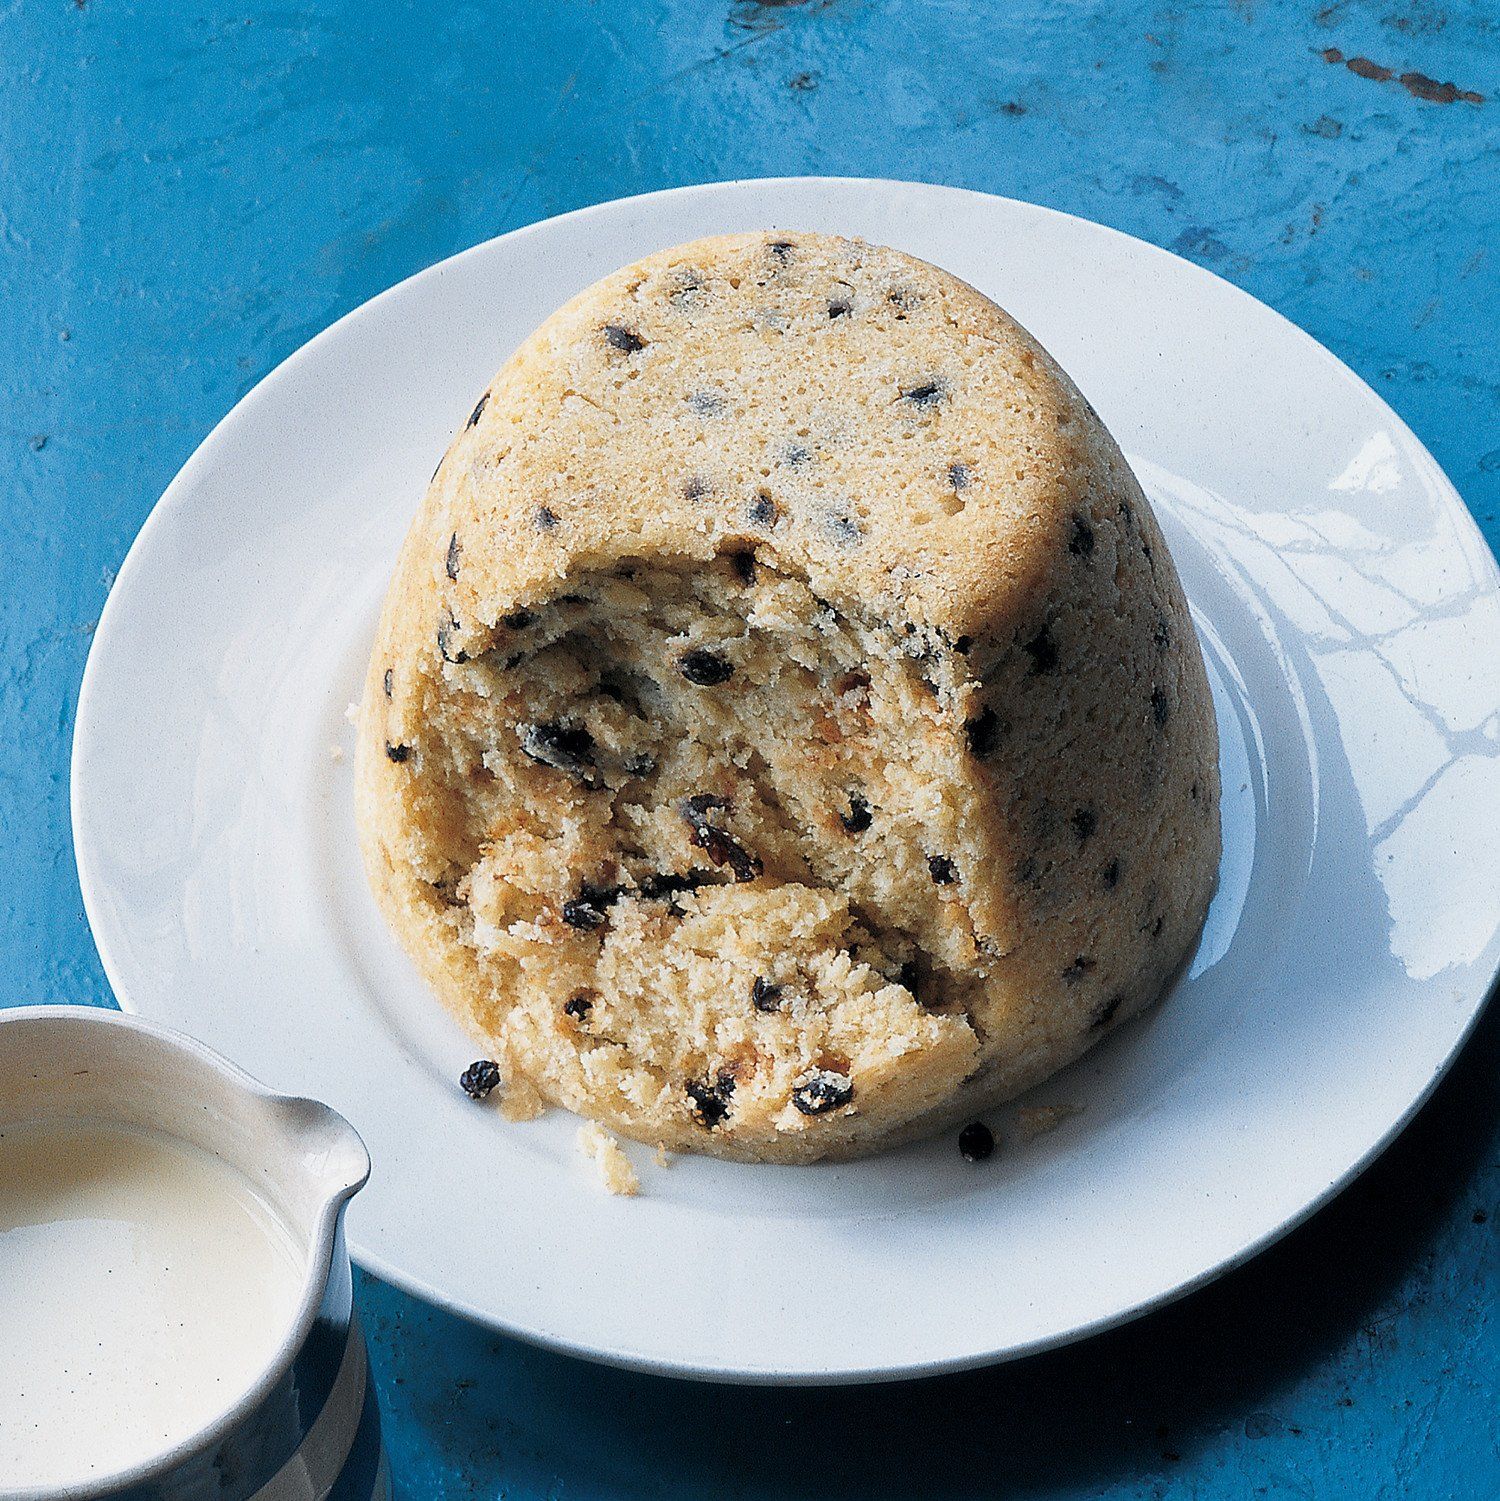 Snazz reccomend Desert spotted dick